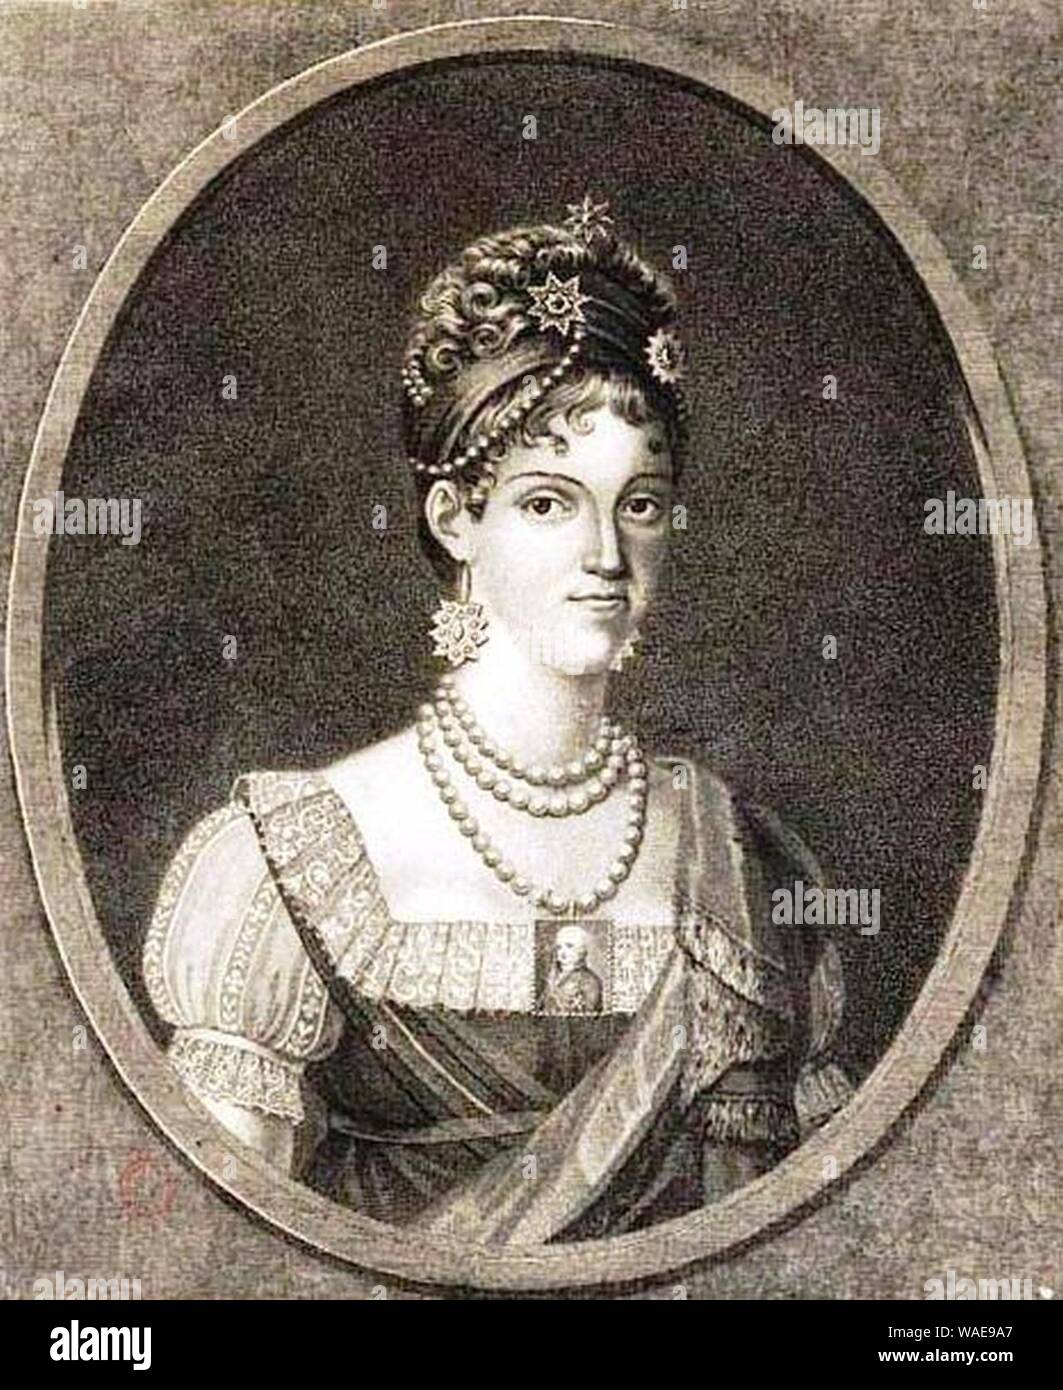 Drawing of Carlota Joaquina of Spain by an unknown artist. Stock Photo